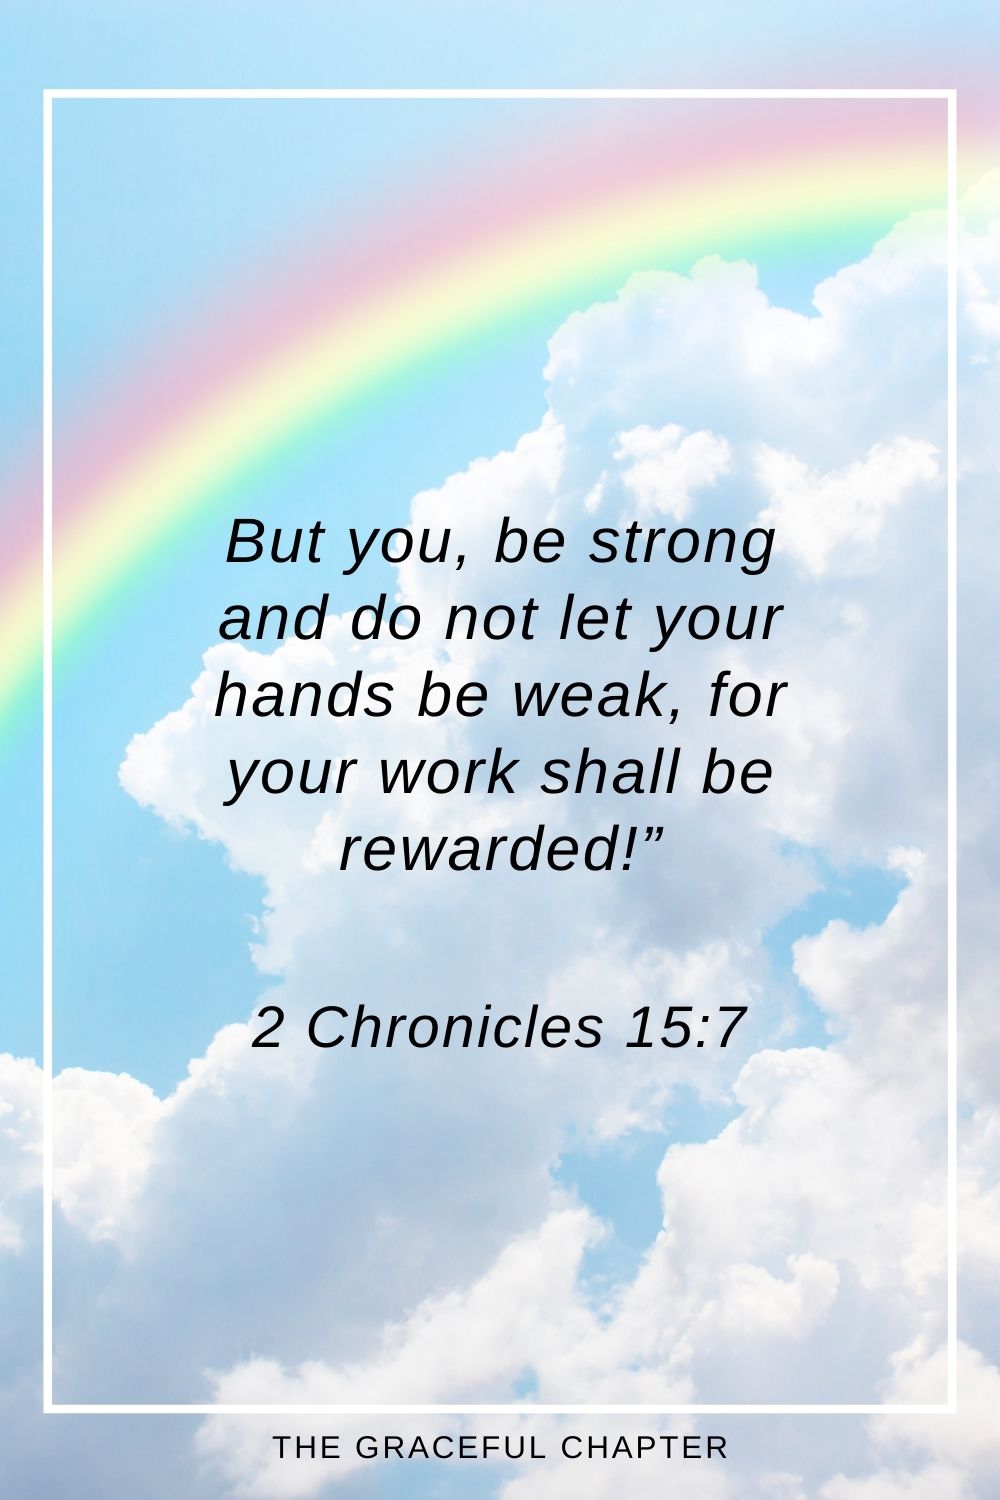 But you, be strong and do not let your hands be weak, for your work shall be rewarded!” 2 Chronicles 15:7